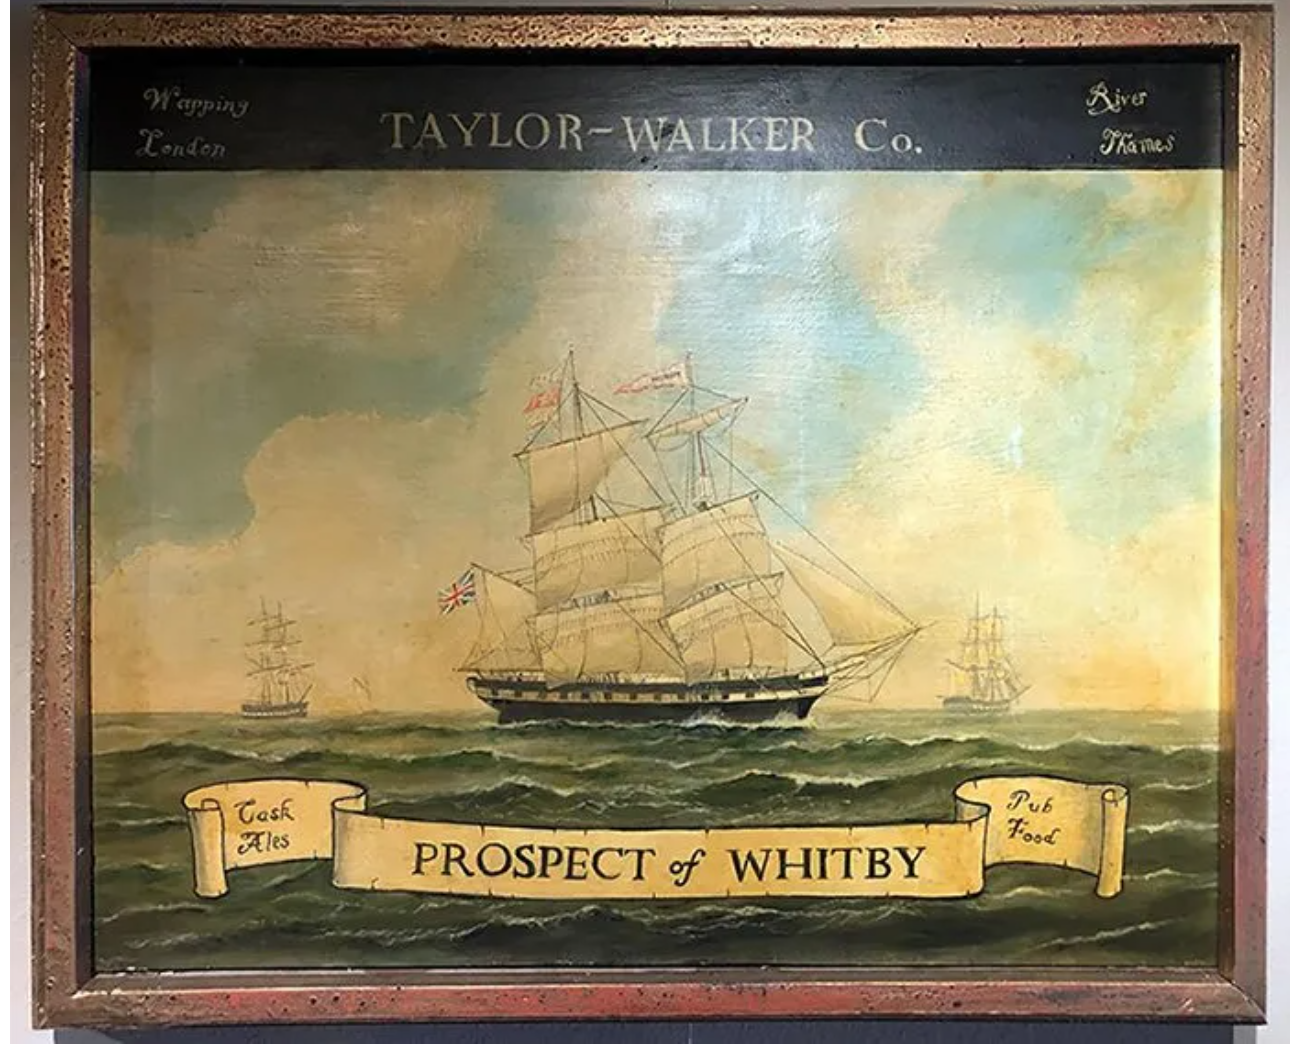 A large antique sign from The Prospect of Whitby pub sold for $1,600 plus the buyer’s premium in July 2018. Image courtesy of Worthington Galleries and LiveAuctioneers.